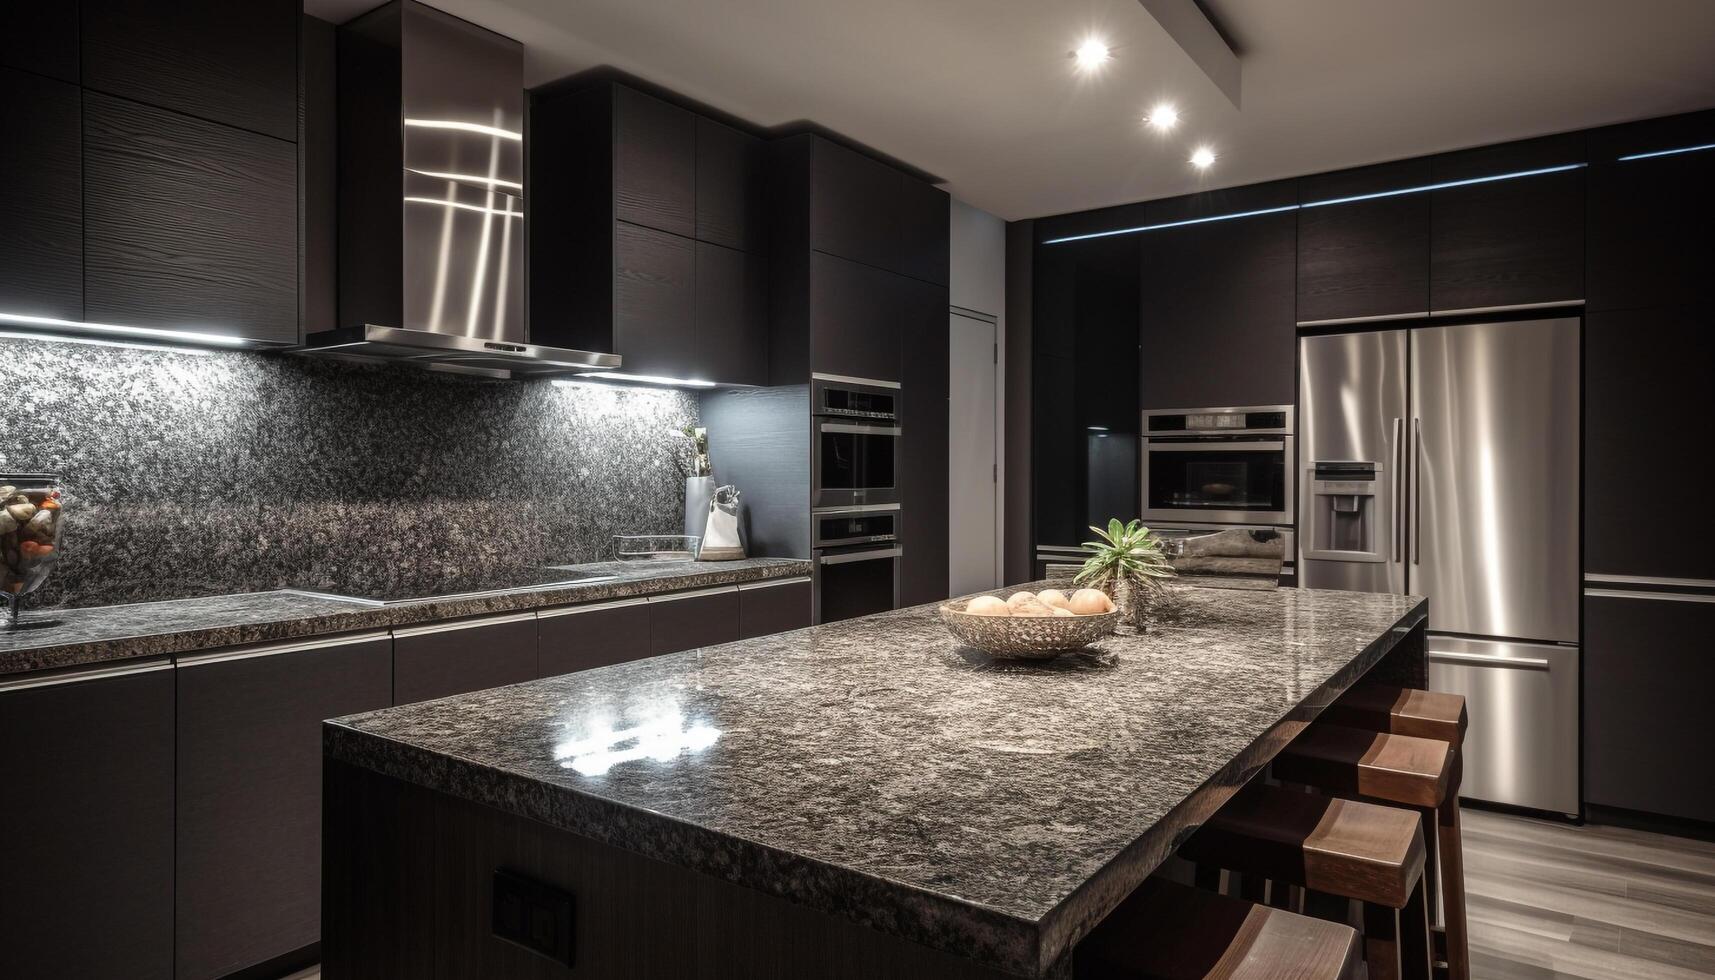 Modern luxury kitchen design with stainless steel appliances and granite countertops generated by AI photo